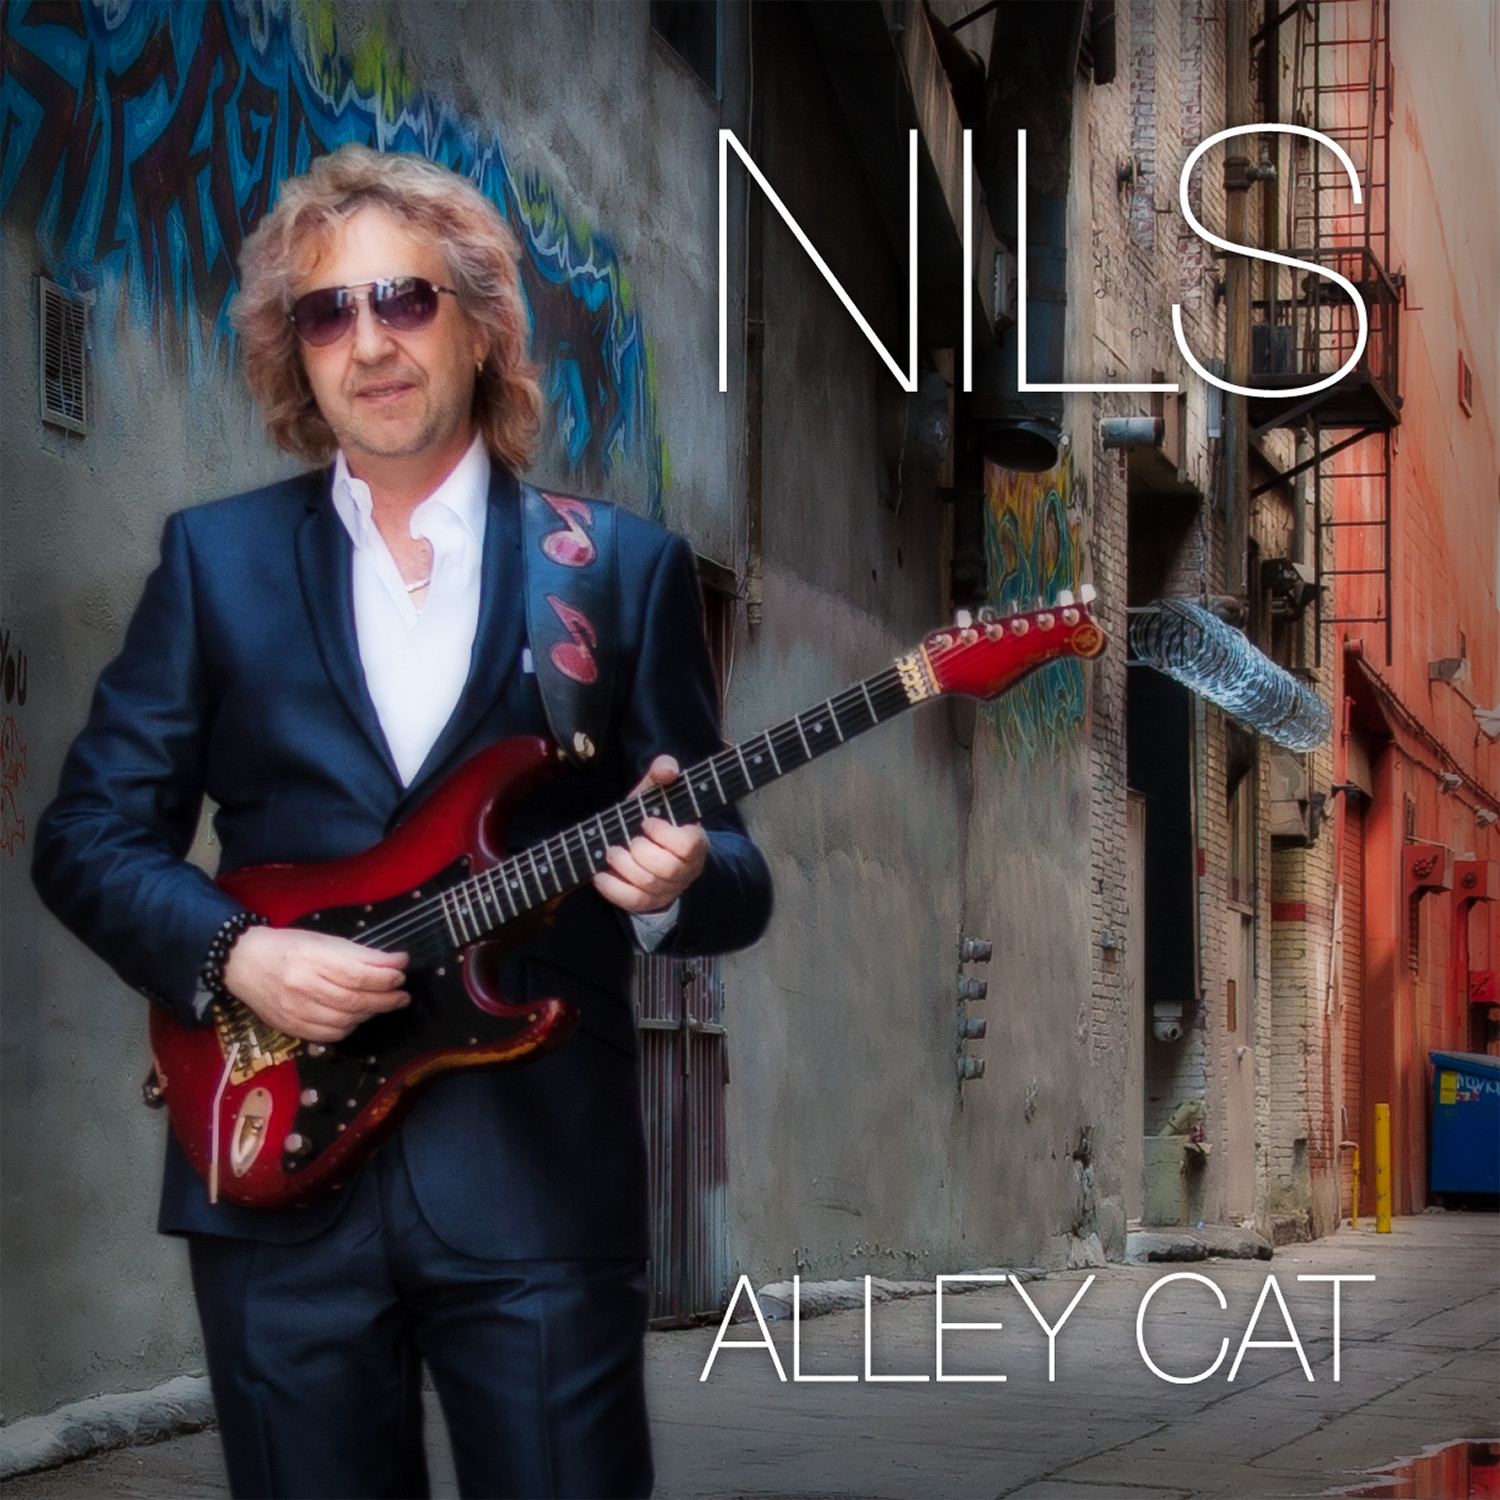 Alley cat CD cover